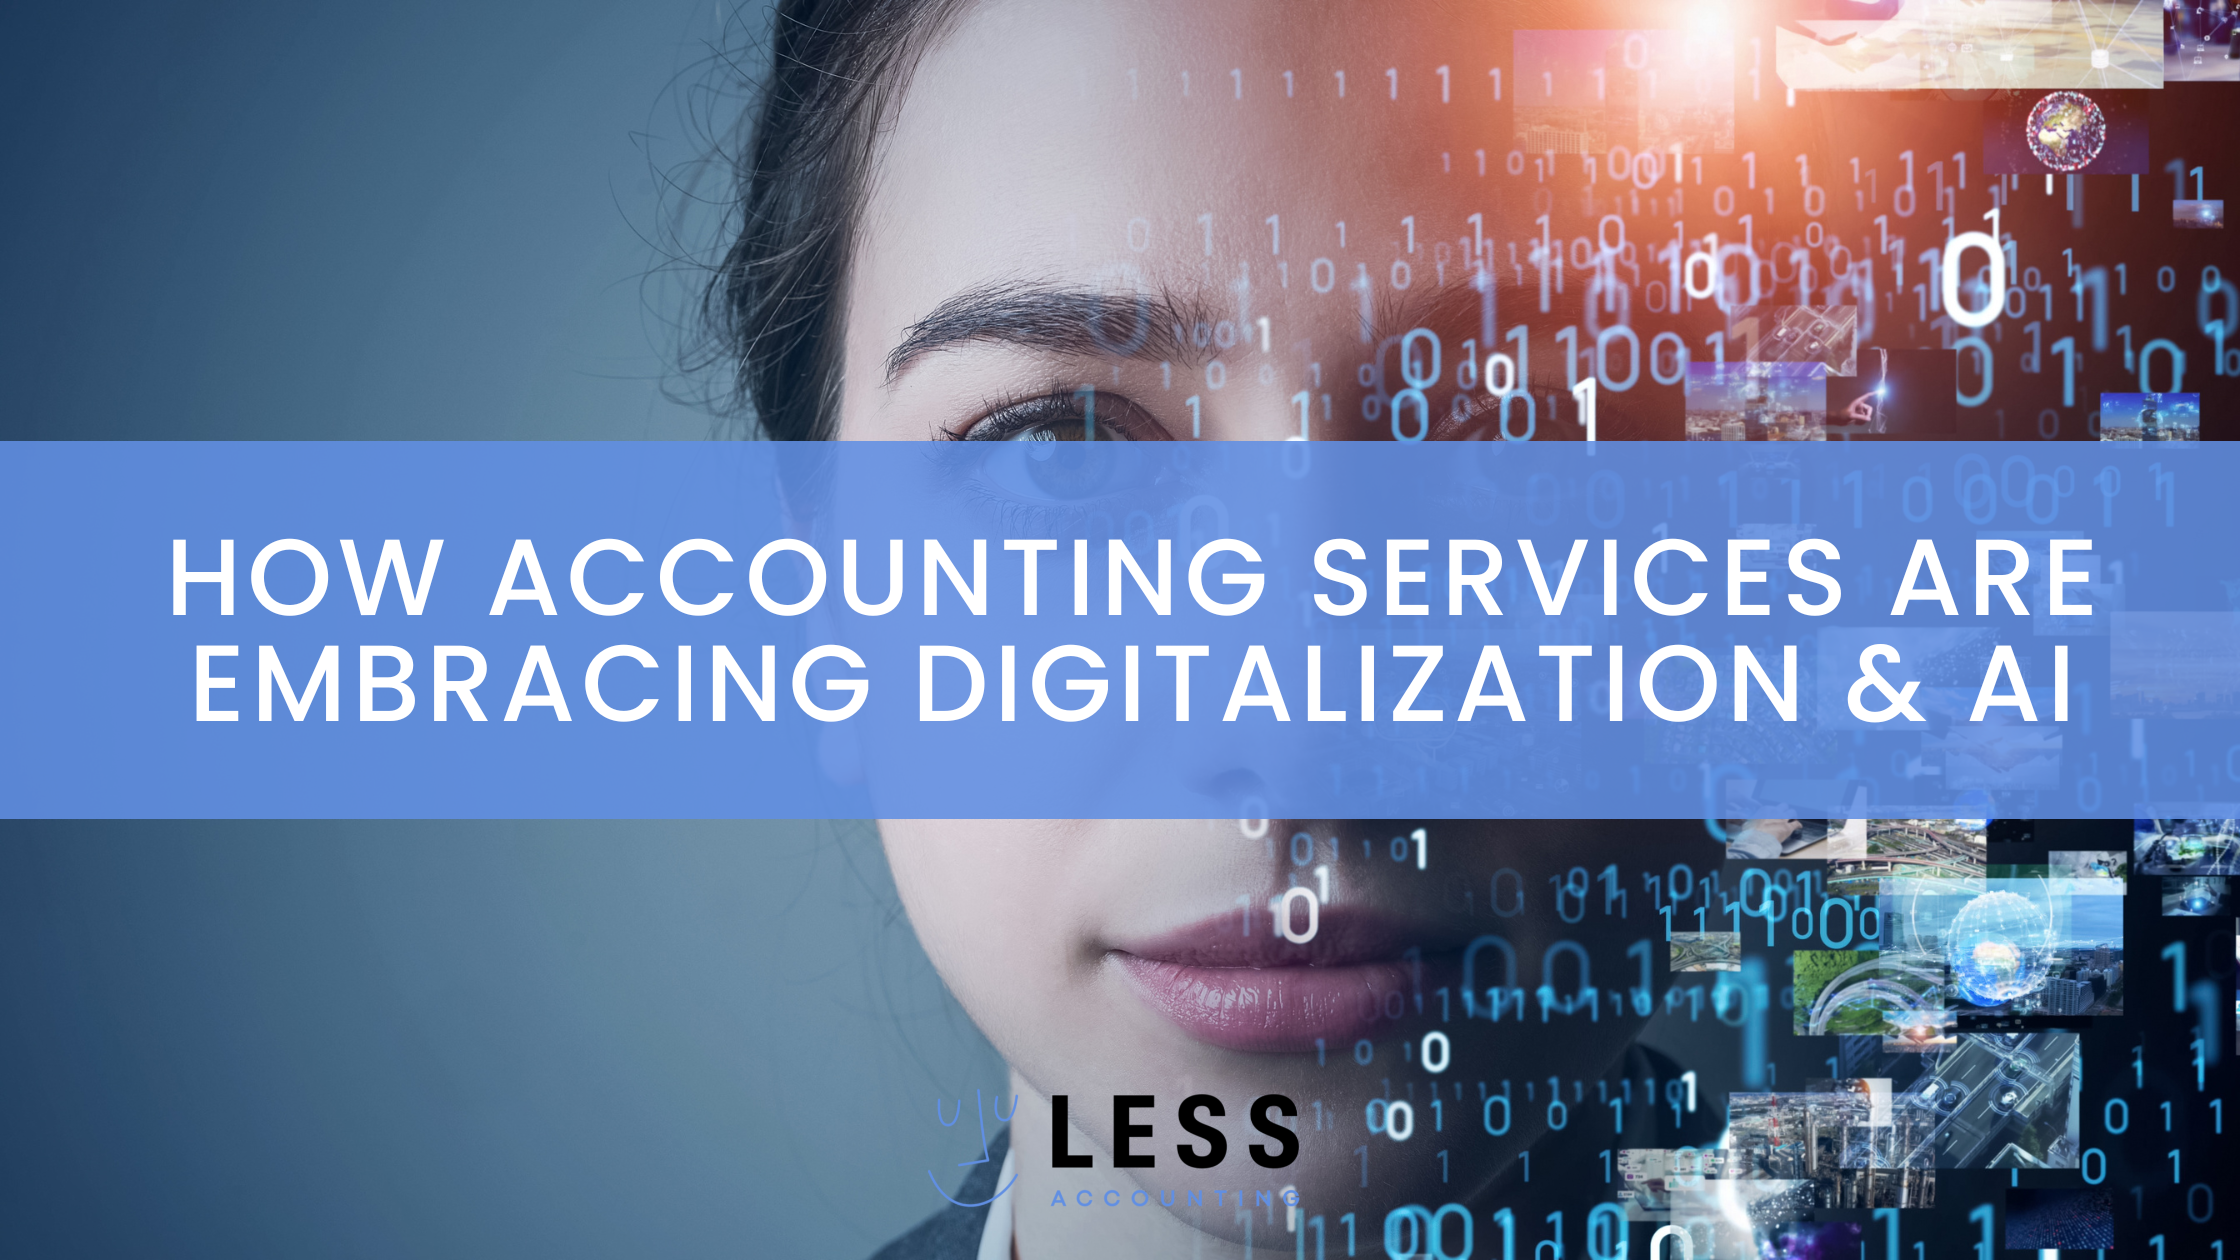 How accounting services are embracing digitalization